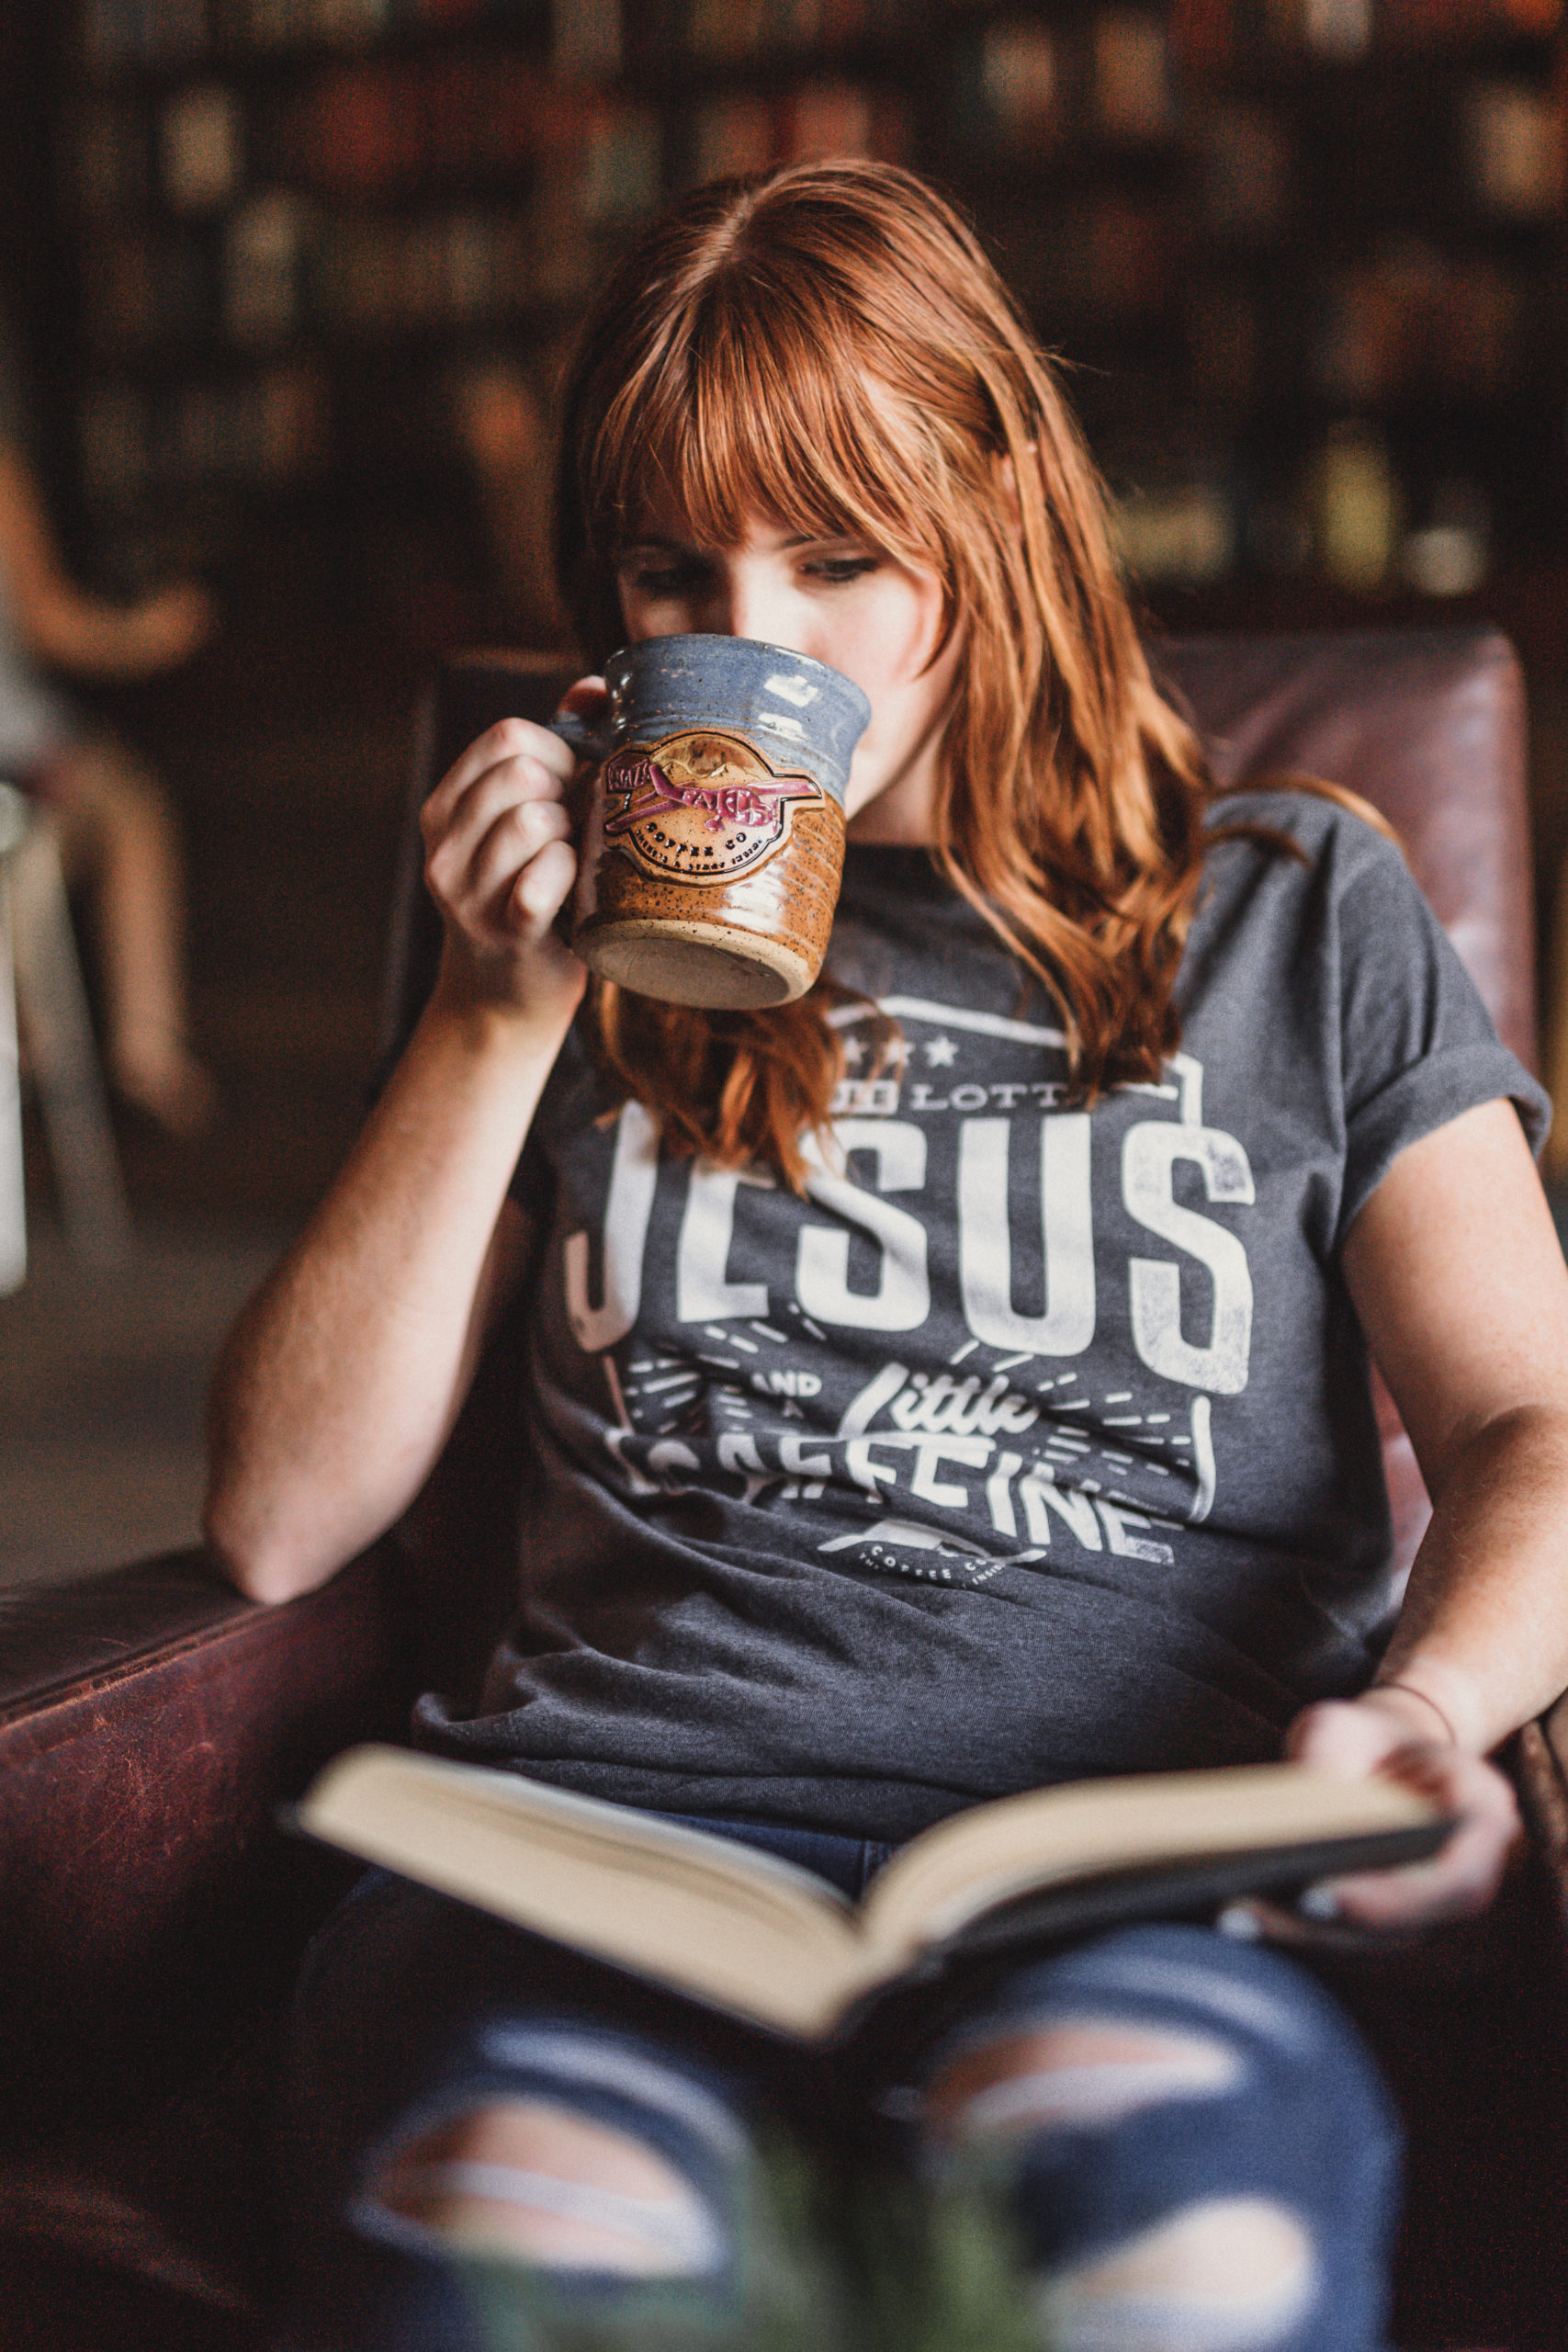 JSM Woman wearing a gray t shirt that says A Whole Lotta Jesus and a Little Caffeine from Crazy Faith drinking some coffee from a brown and gray coffee cup and reading a book